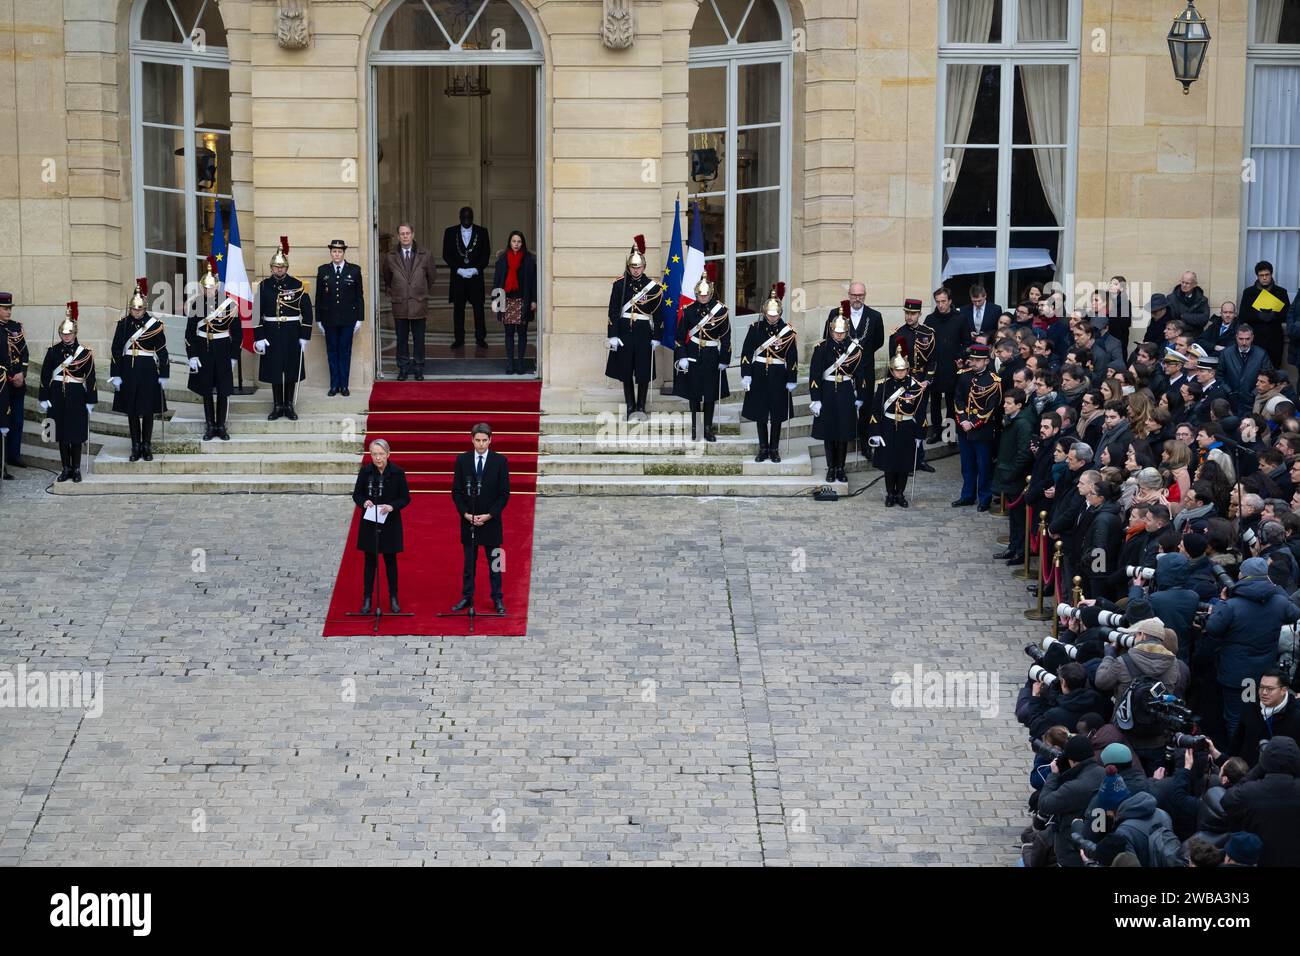 Paris France 09th Jan 2024 French Outgoing Prime Minister Elisabeth Borne And Her Successor Former Minister Of National Education Gabriel Attal During The Handover Ceremony In The Courtyard Of The Hotel Matignon French Prime Ministers Official Residence In Paris France On January 9 2024 Gabriel Attal Becomes The Youngest Prime Minister In The History Of The Fifth Republic Photo By Eric Tschaenpoolabacapresscom Credit Abaca Pressalamy Live News 2WBA3N3 